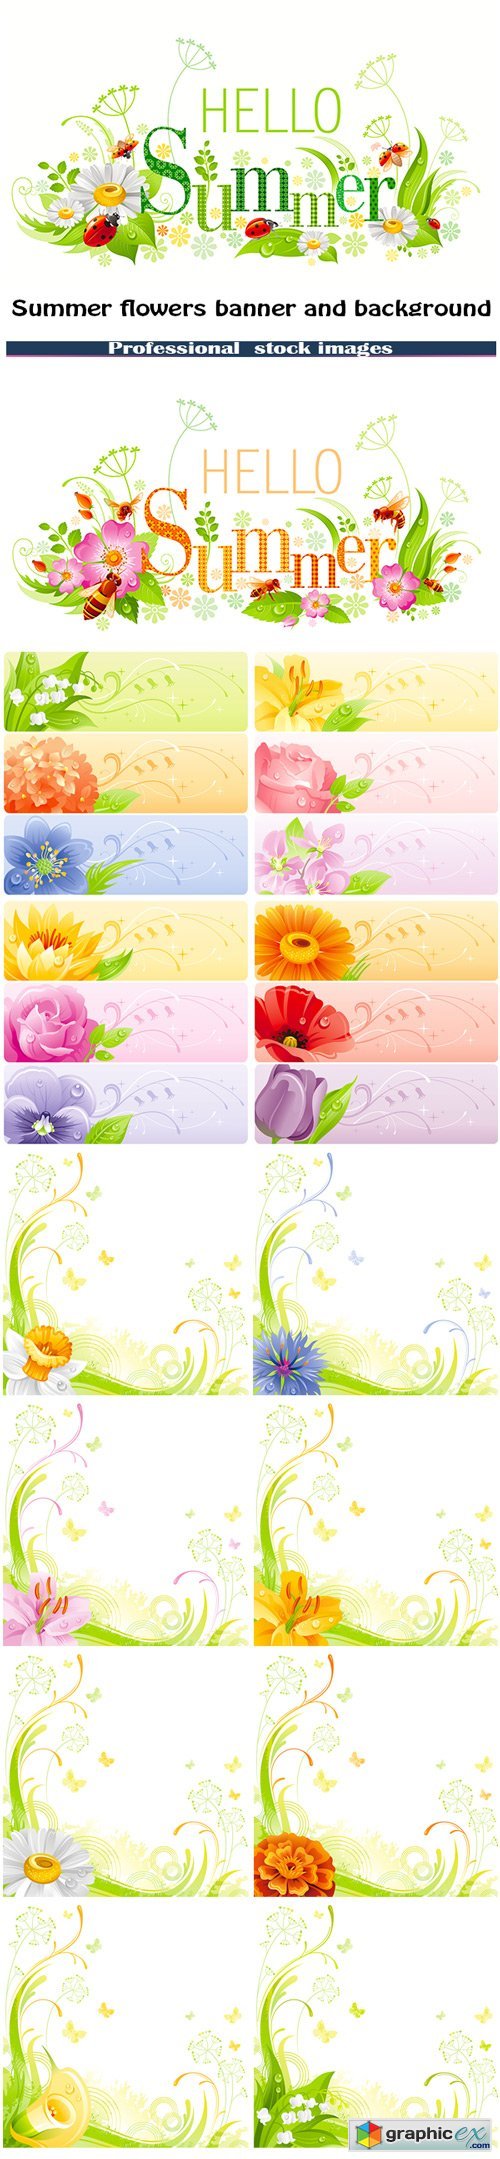 Summer flowers banner and background